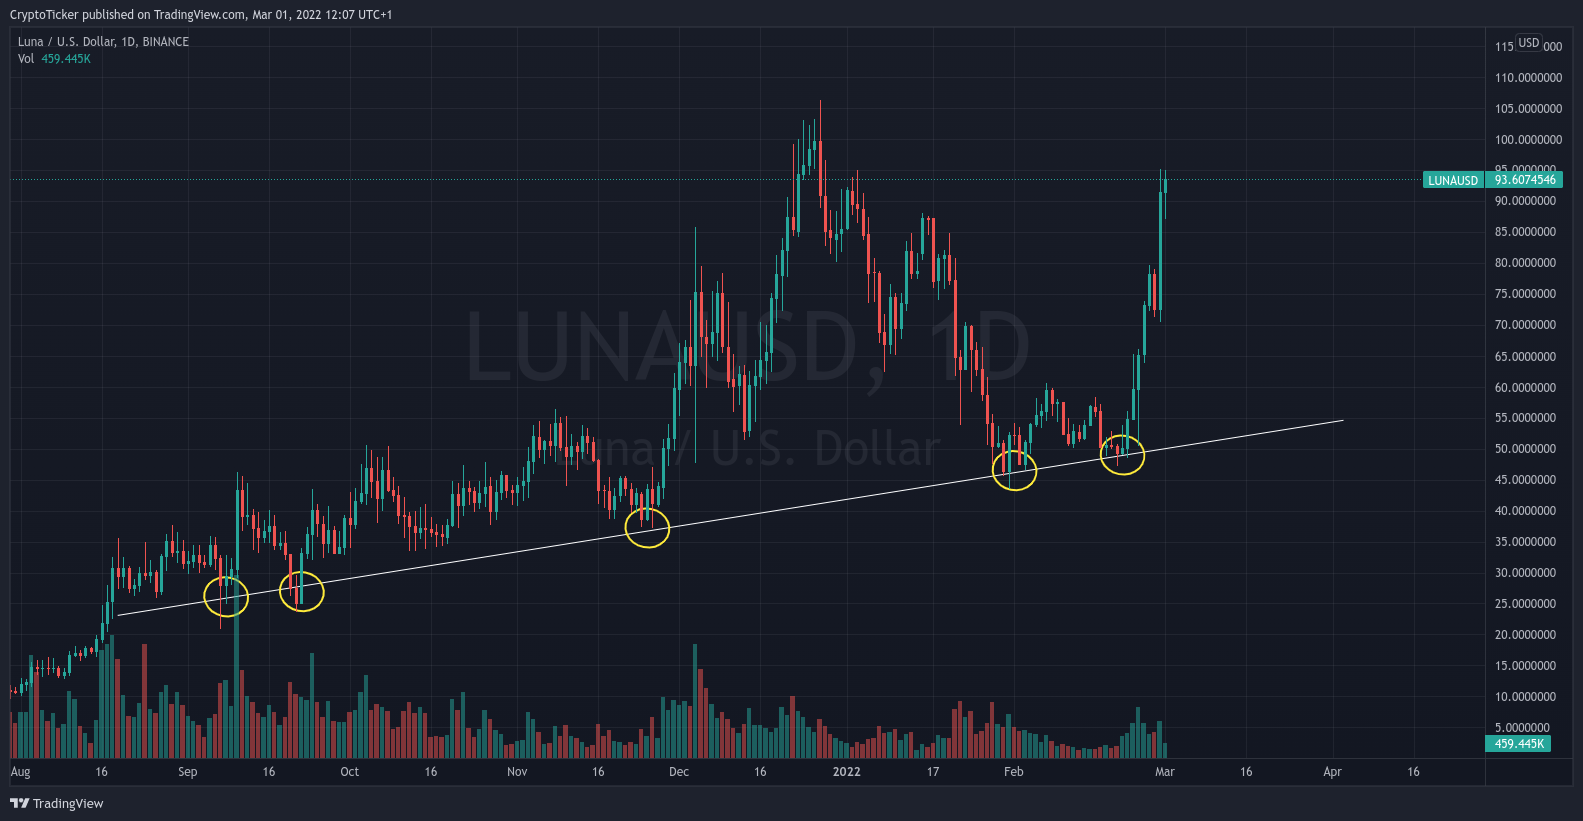 LUNA/USD 1-day chart showing the average uptrend of LUNA